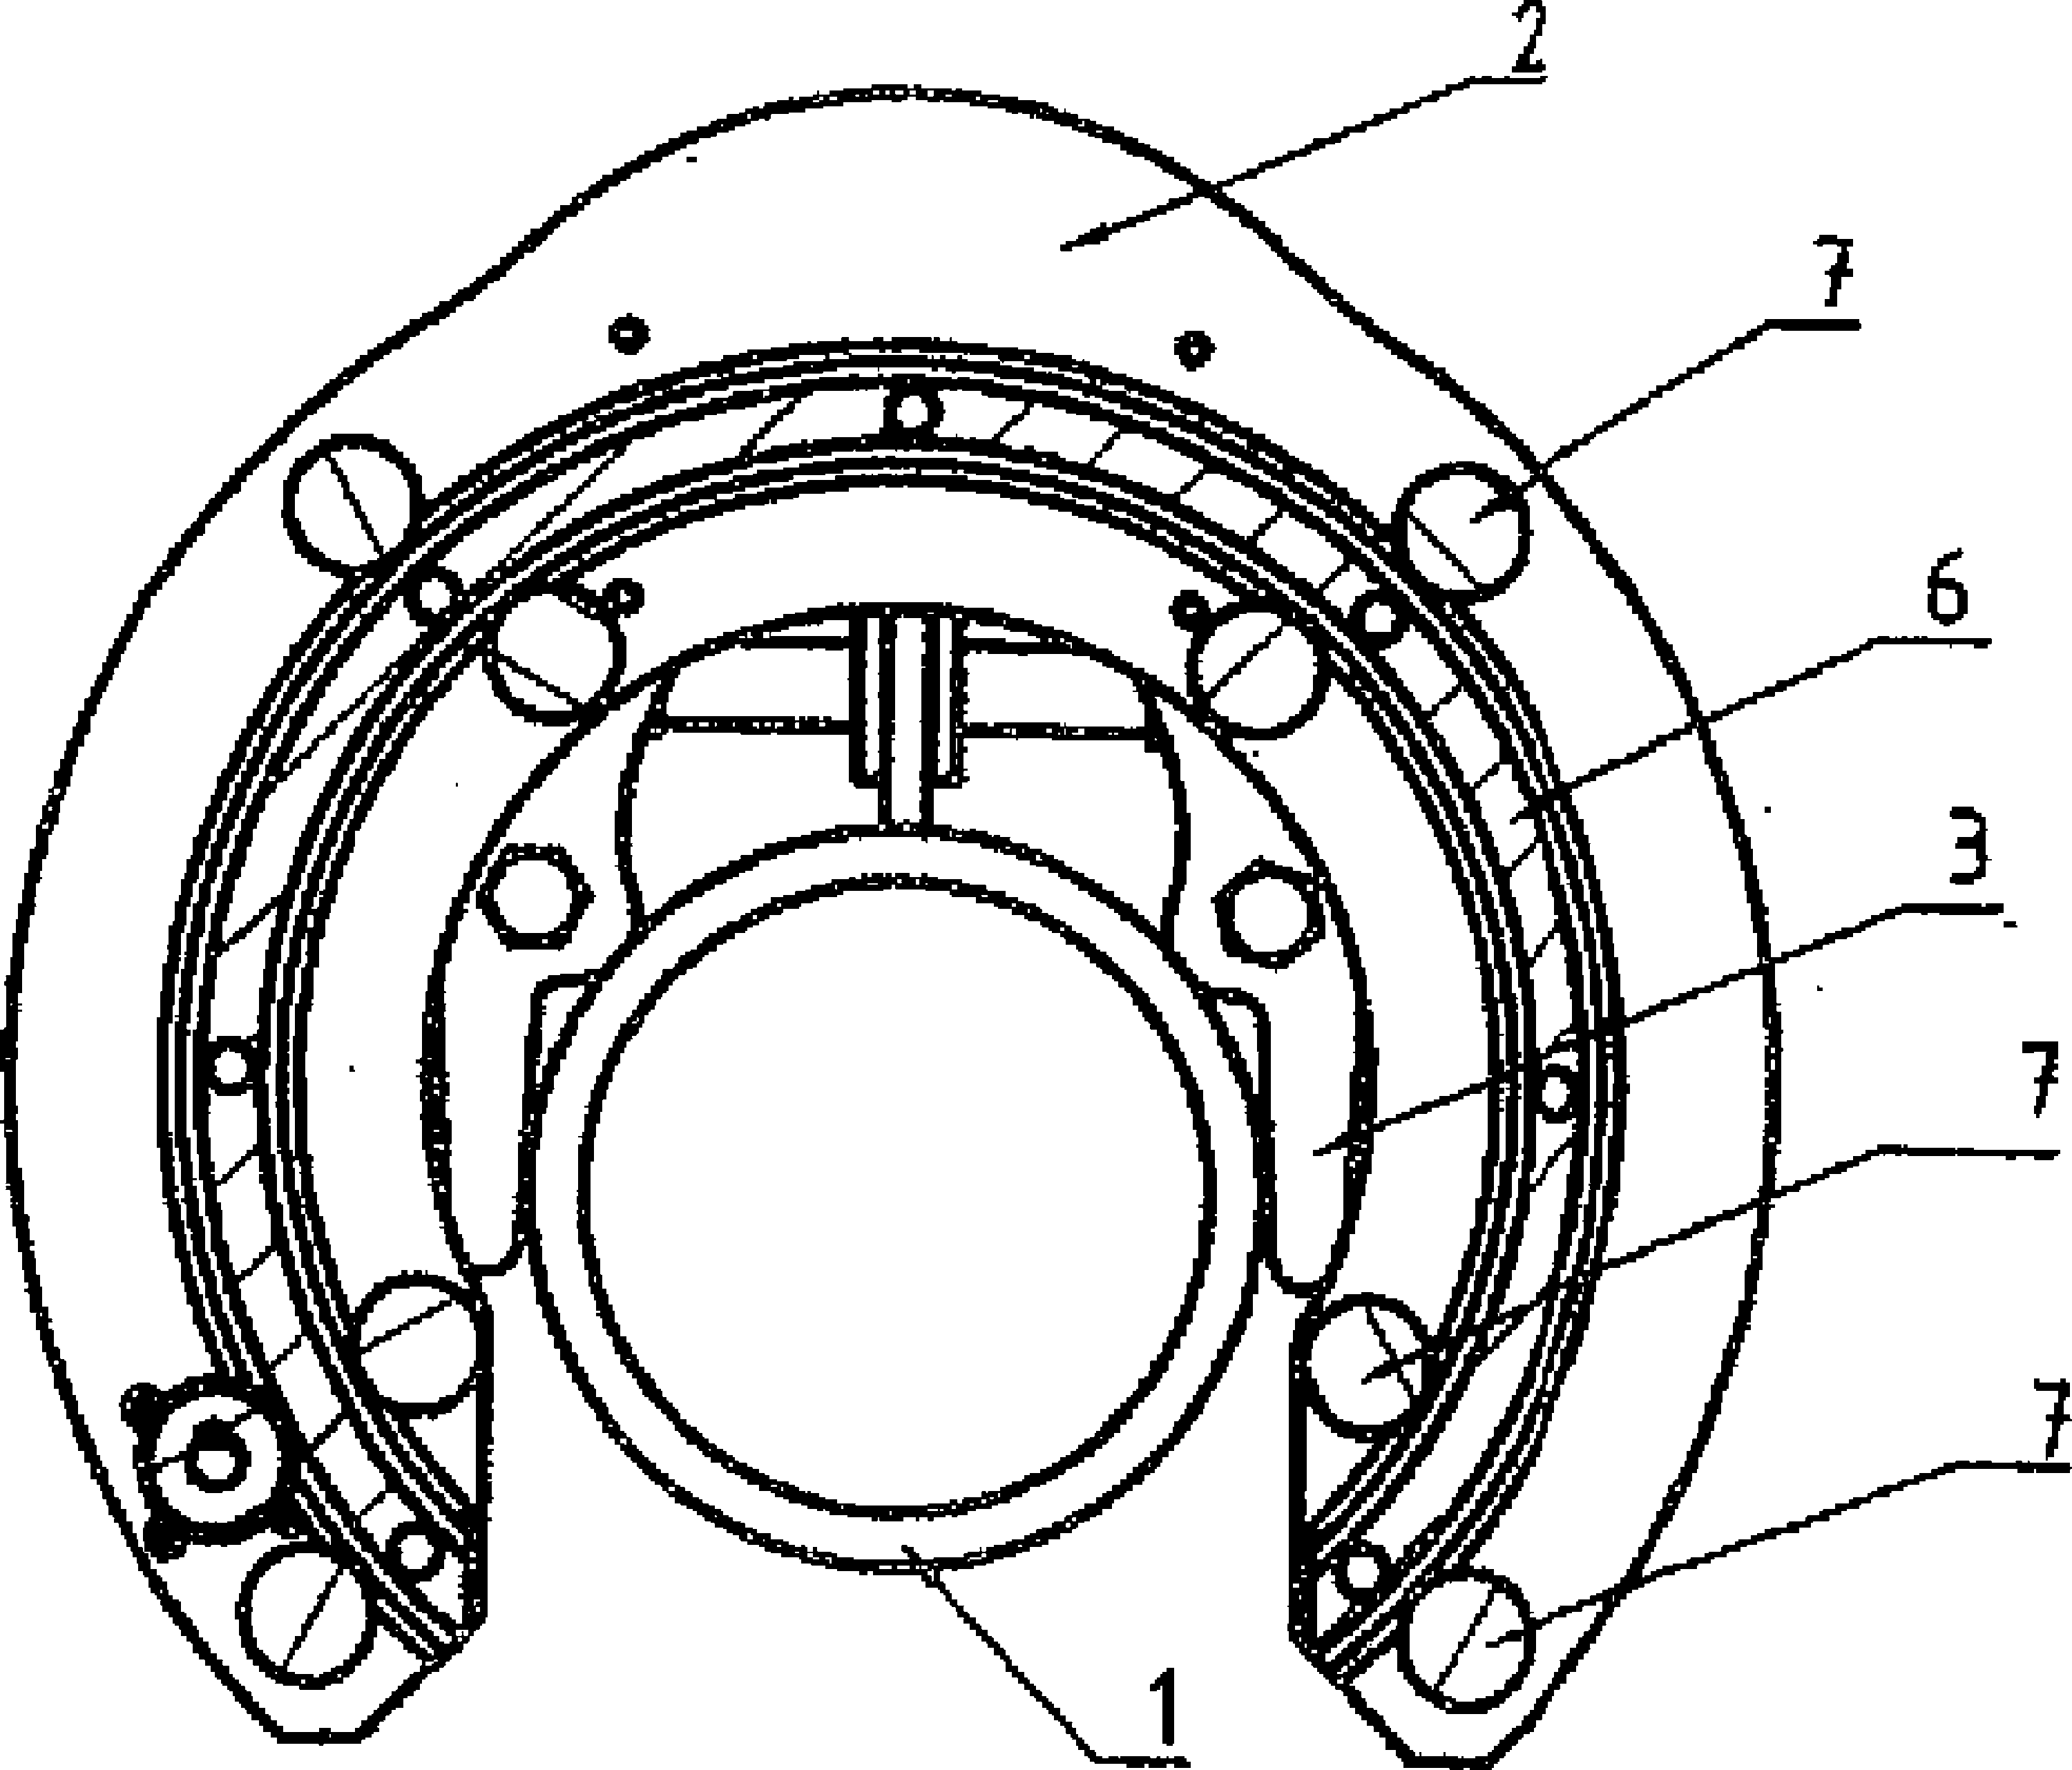 Device for connecting the ends of pipes made of steel by means of an orbital welding process